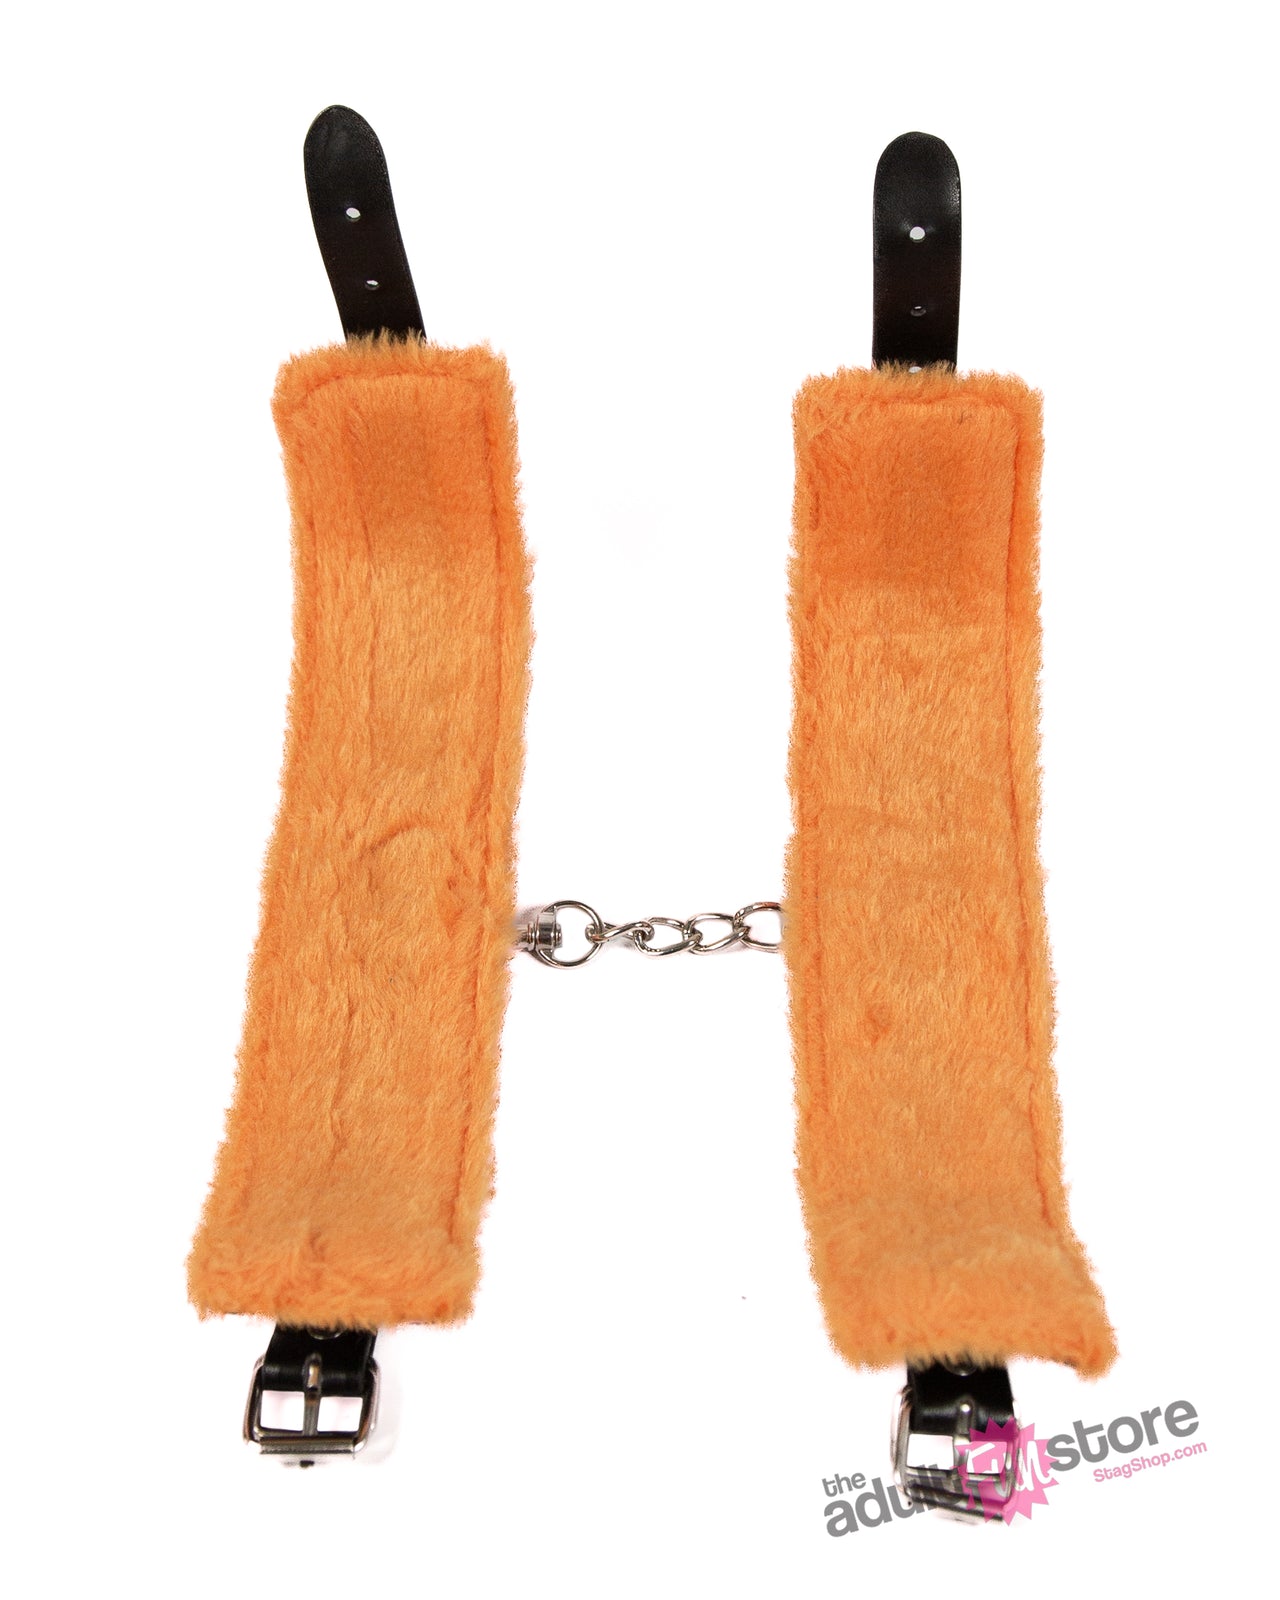 Icon Brands - Orange is the New Black - Restrain Yourself Kit 1 - Stag Shop